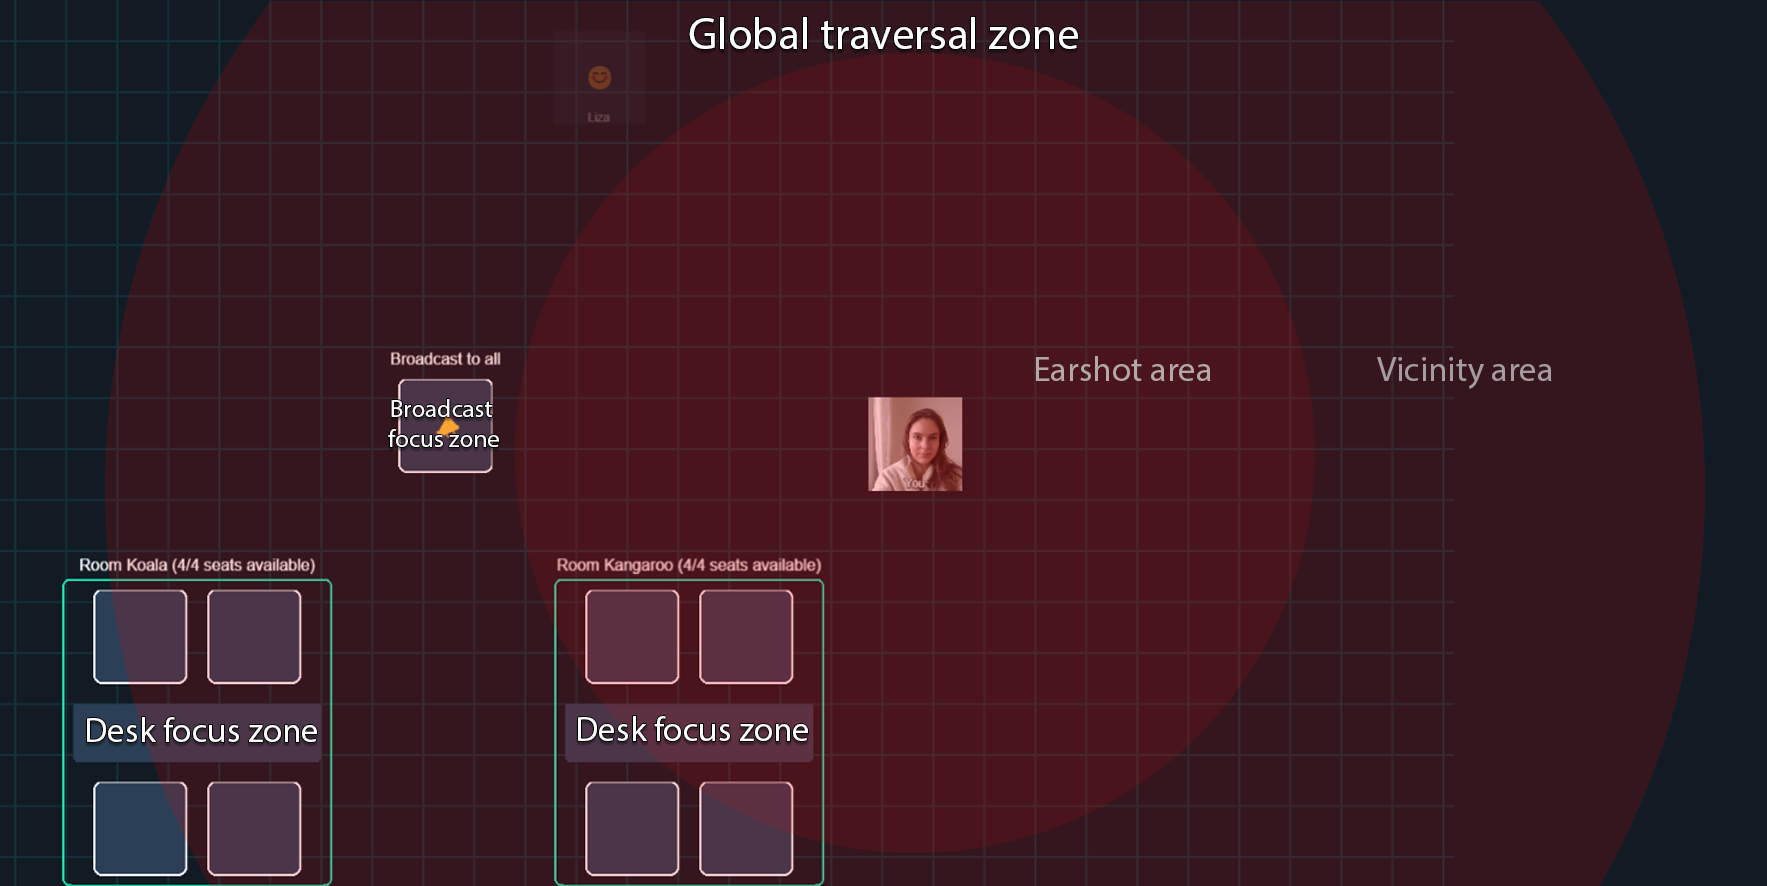 View of a 2D world labelling different zone types